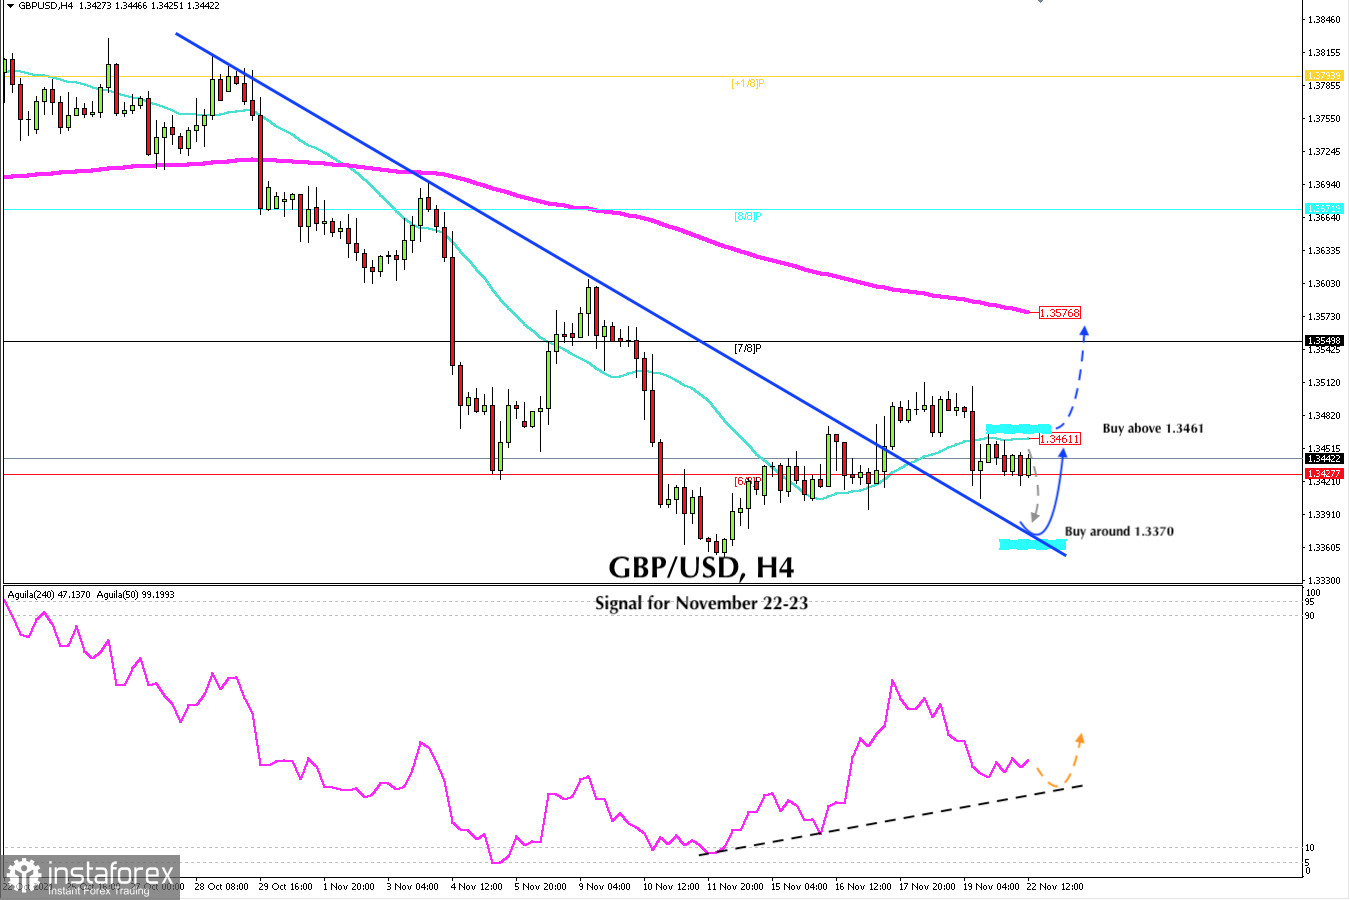 Trading signal for GBP/USD on November 22 - 23, 2021: buy in case of rebound off 1.3370 (bearish trend line)